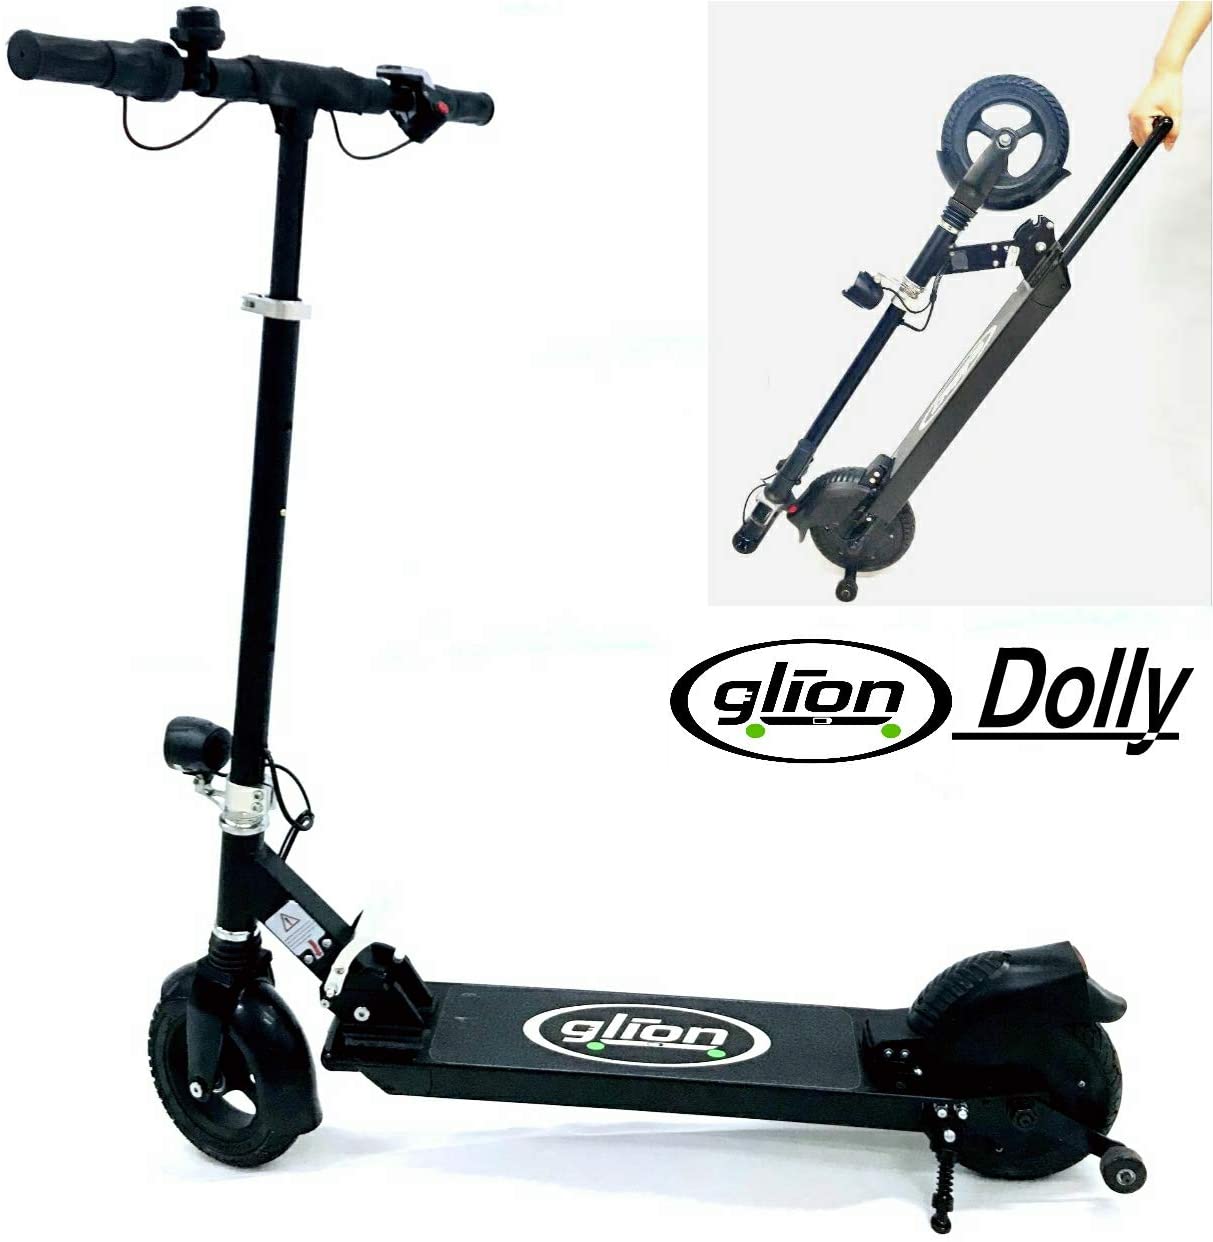 Buy Glion Dolly Foldable Lightweight Adult Electric Scooter UL Certified  Online in Vietnam. B018KTMOPG